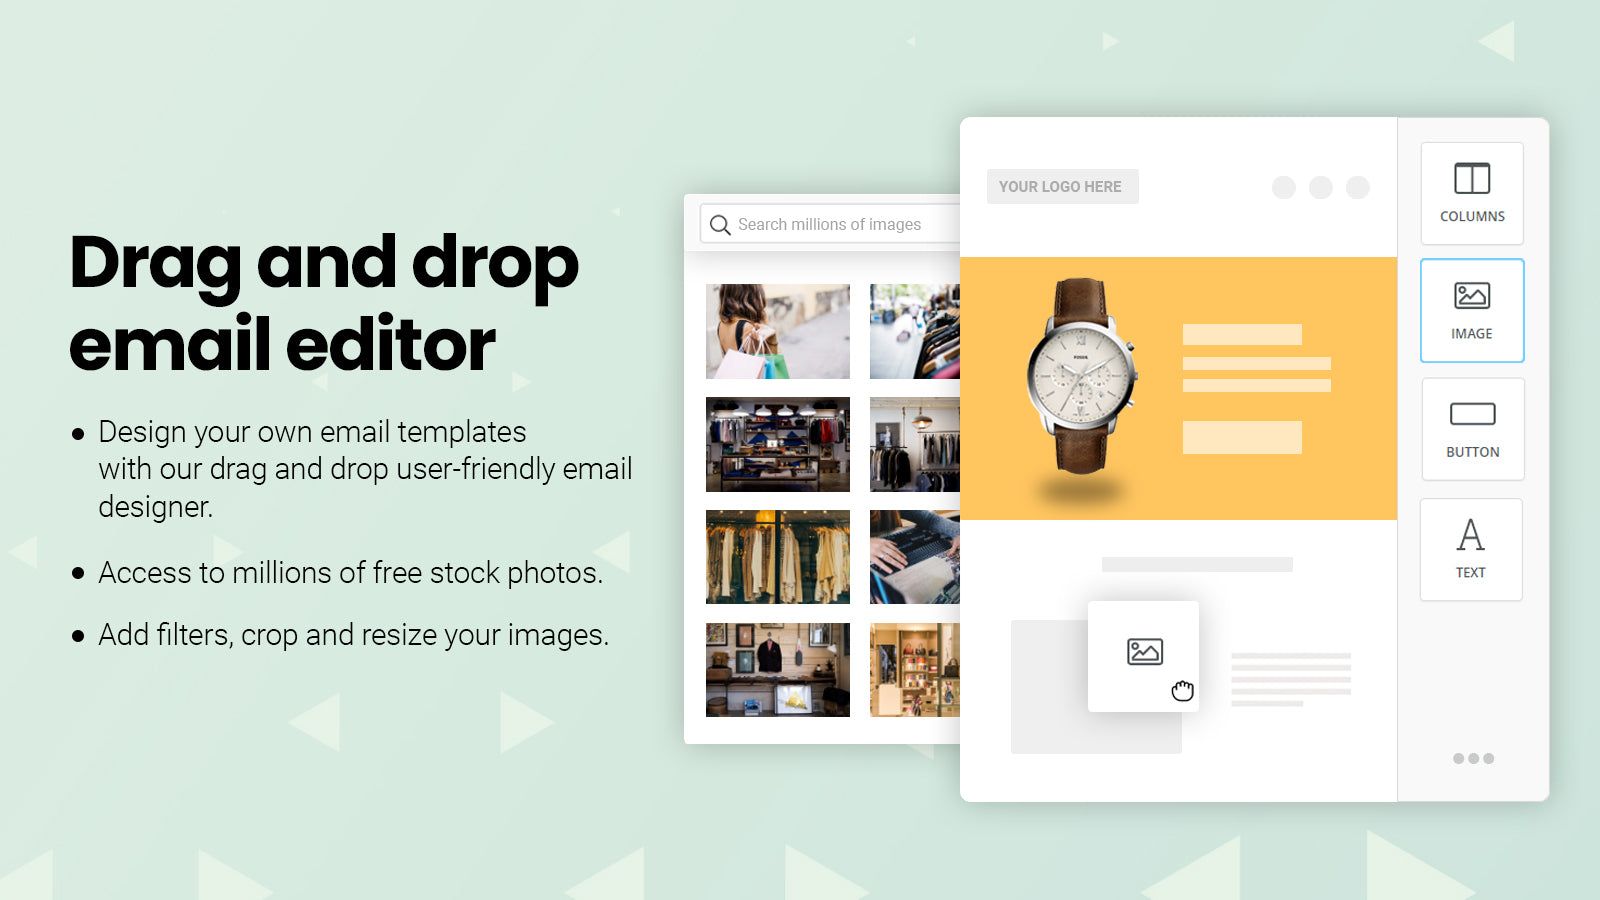 Drag and drop email templates with millions of stock photos